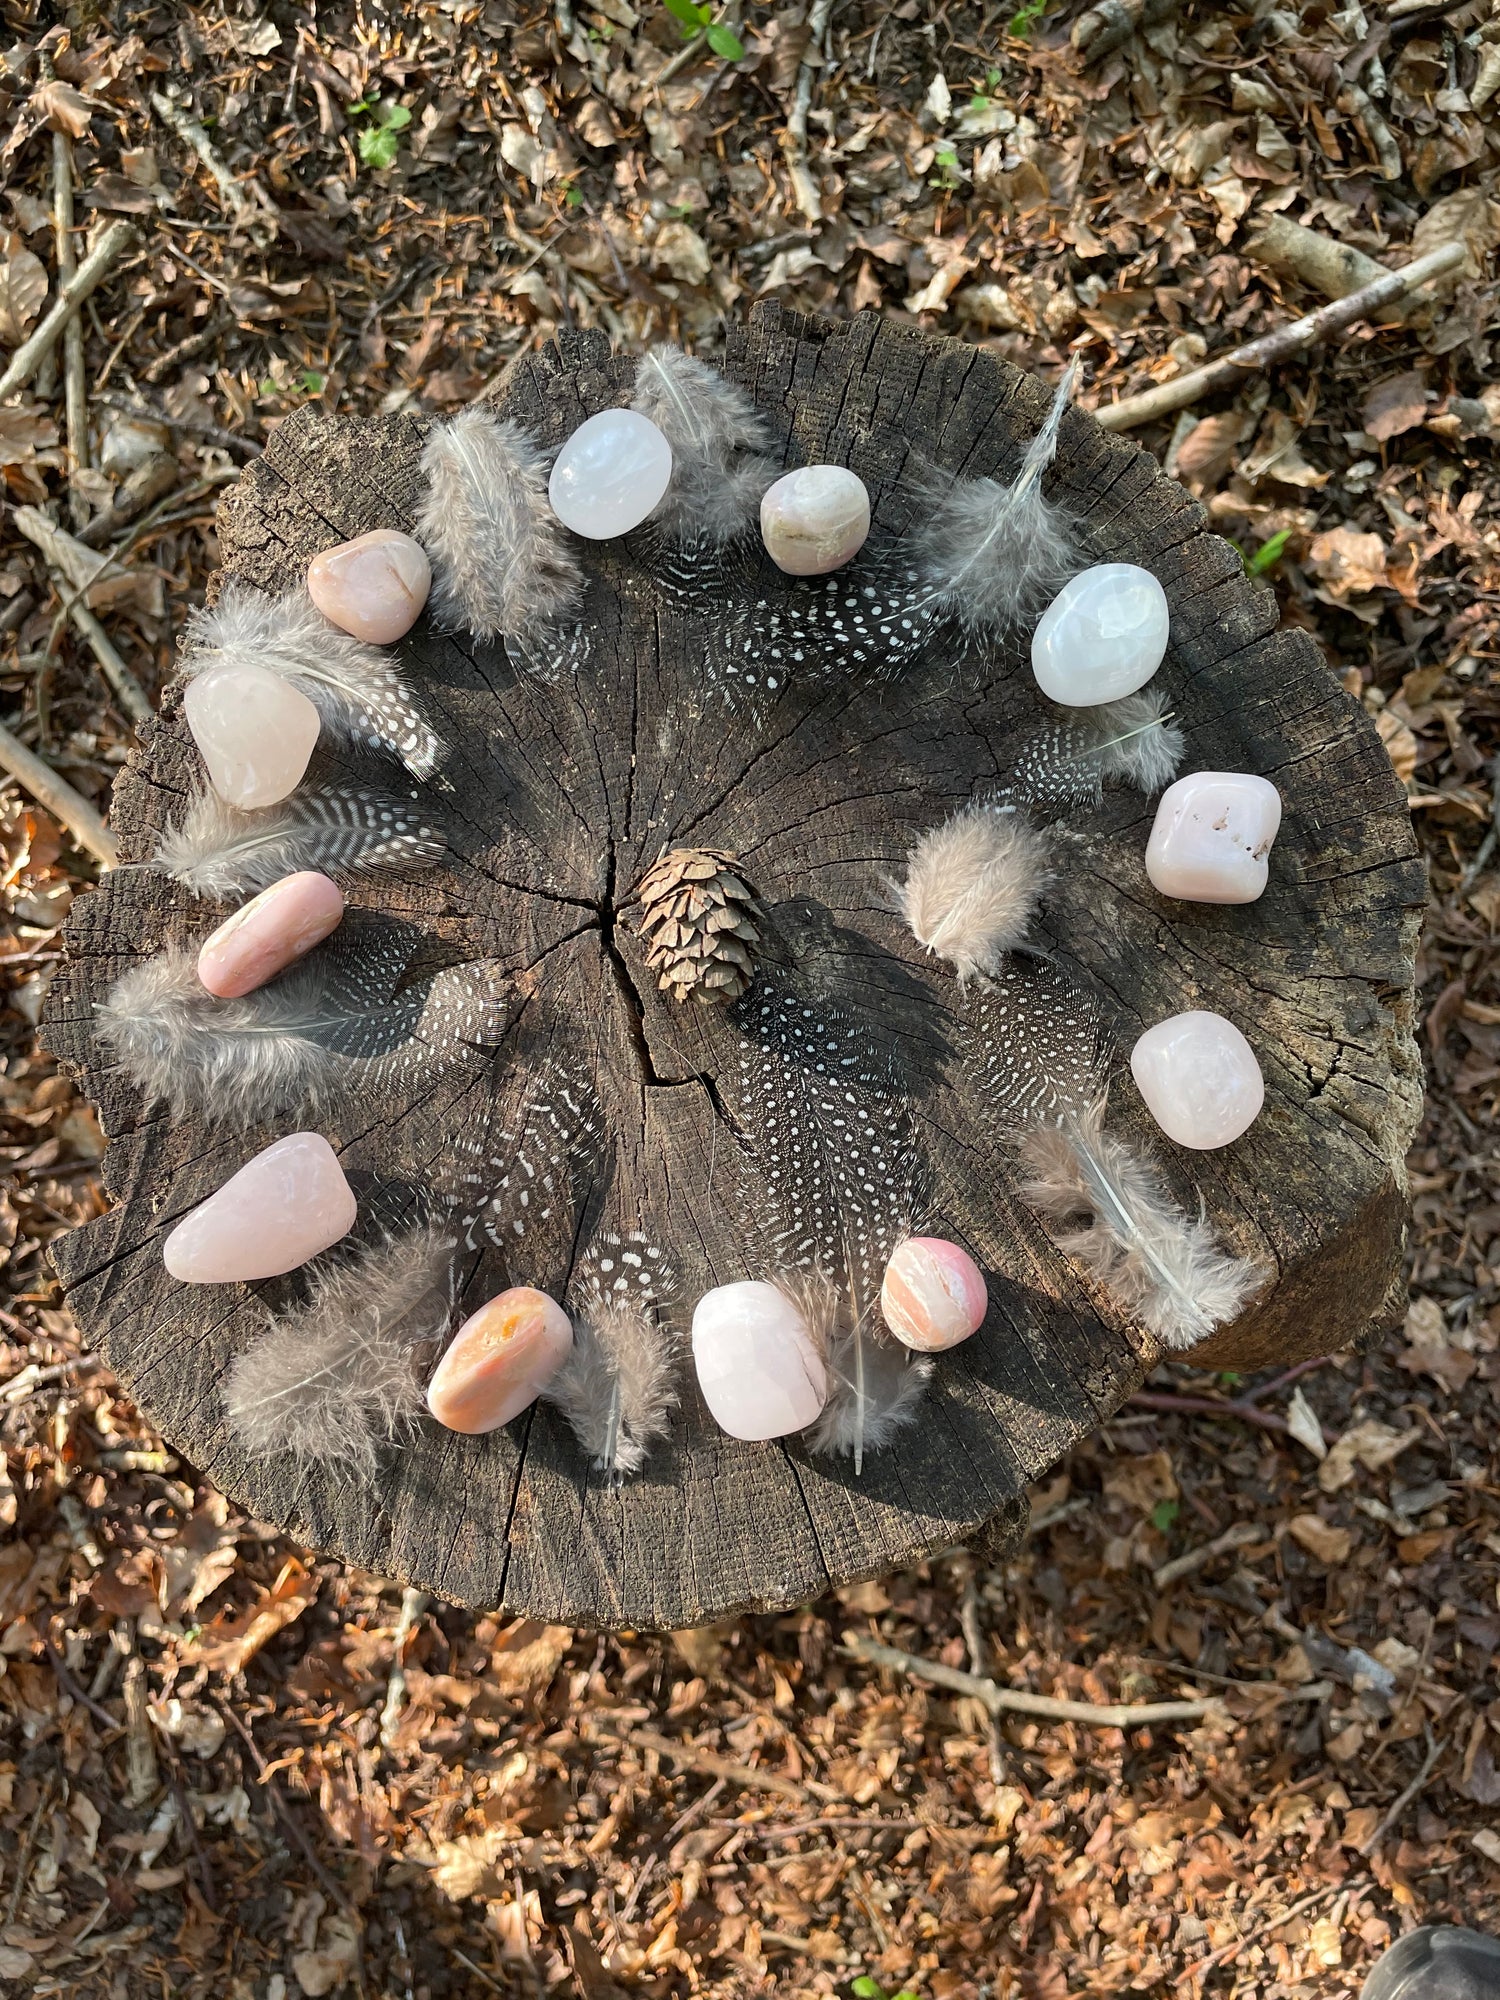 The top view of  tree stump in the setting sun bearing a circular arrangement of crystals shining in the light and spotty feathers strewn here and there